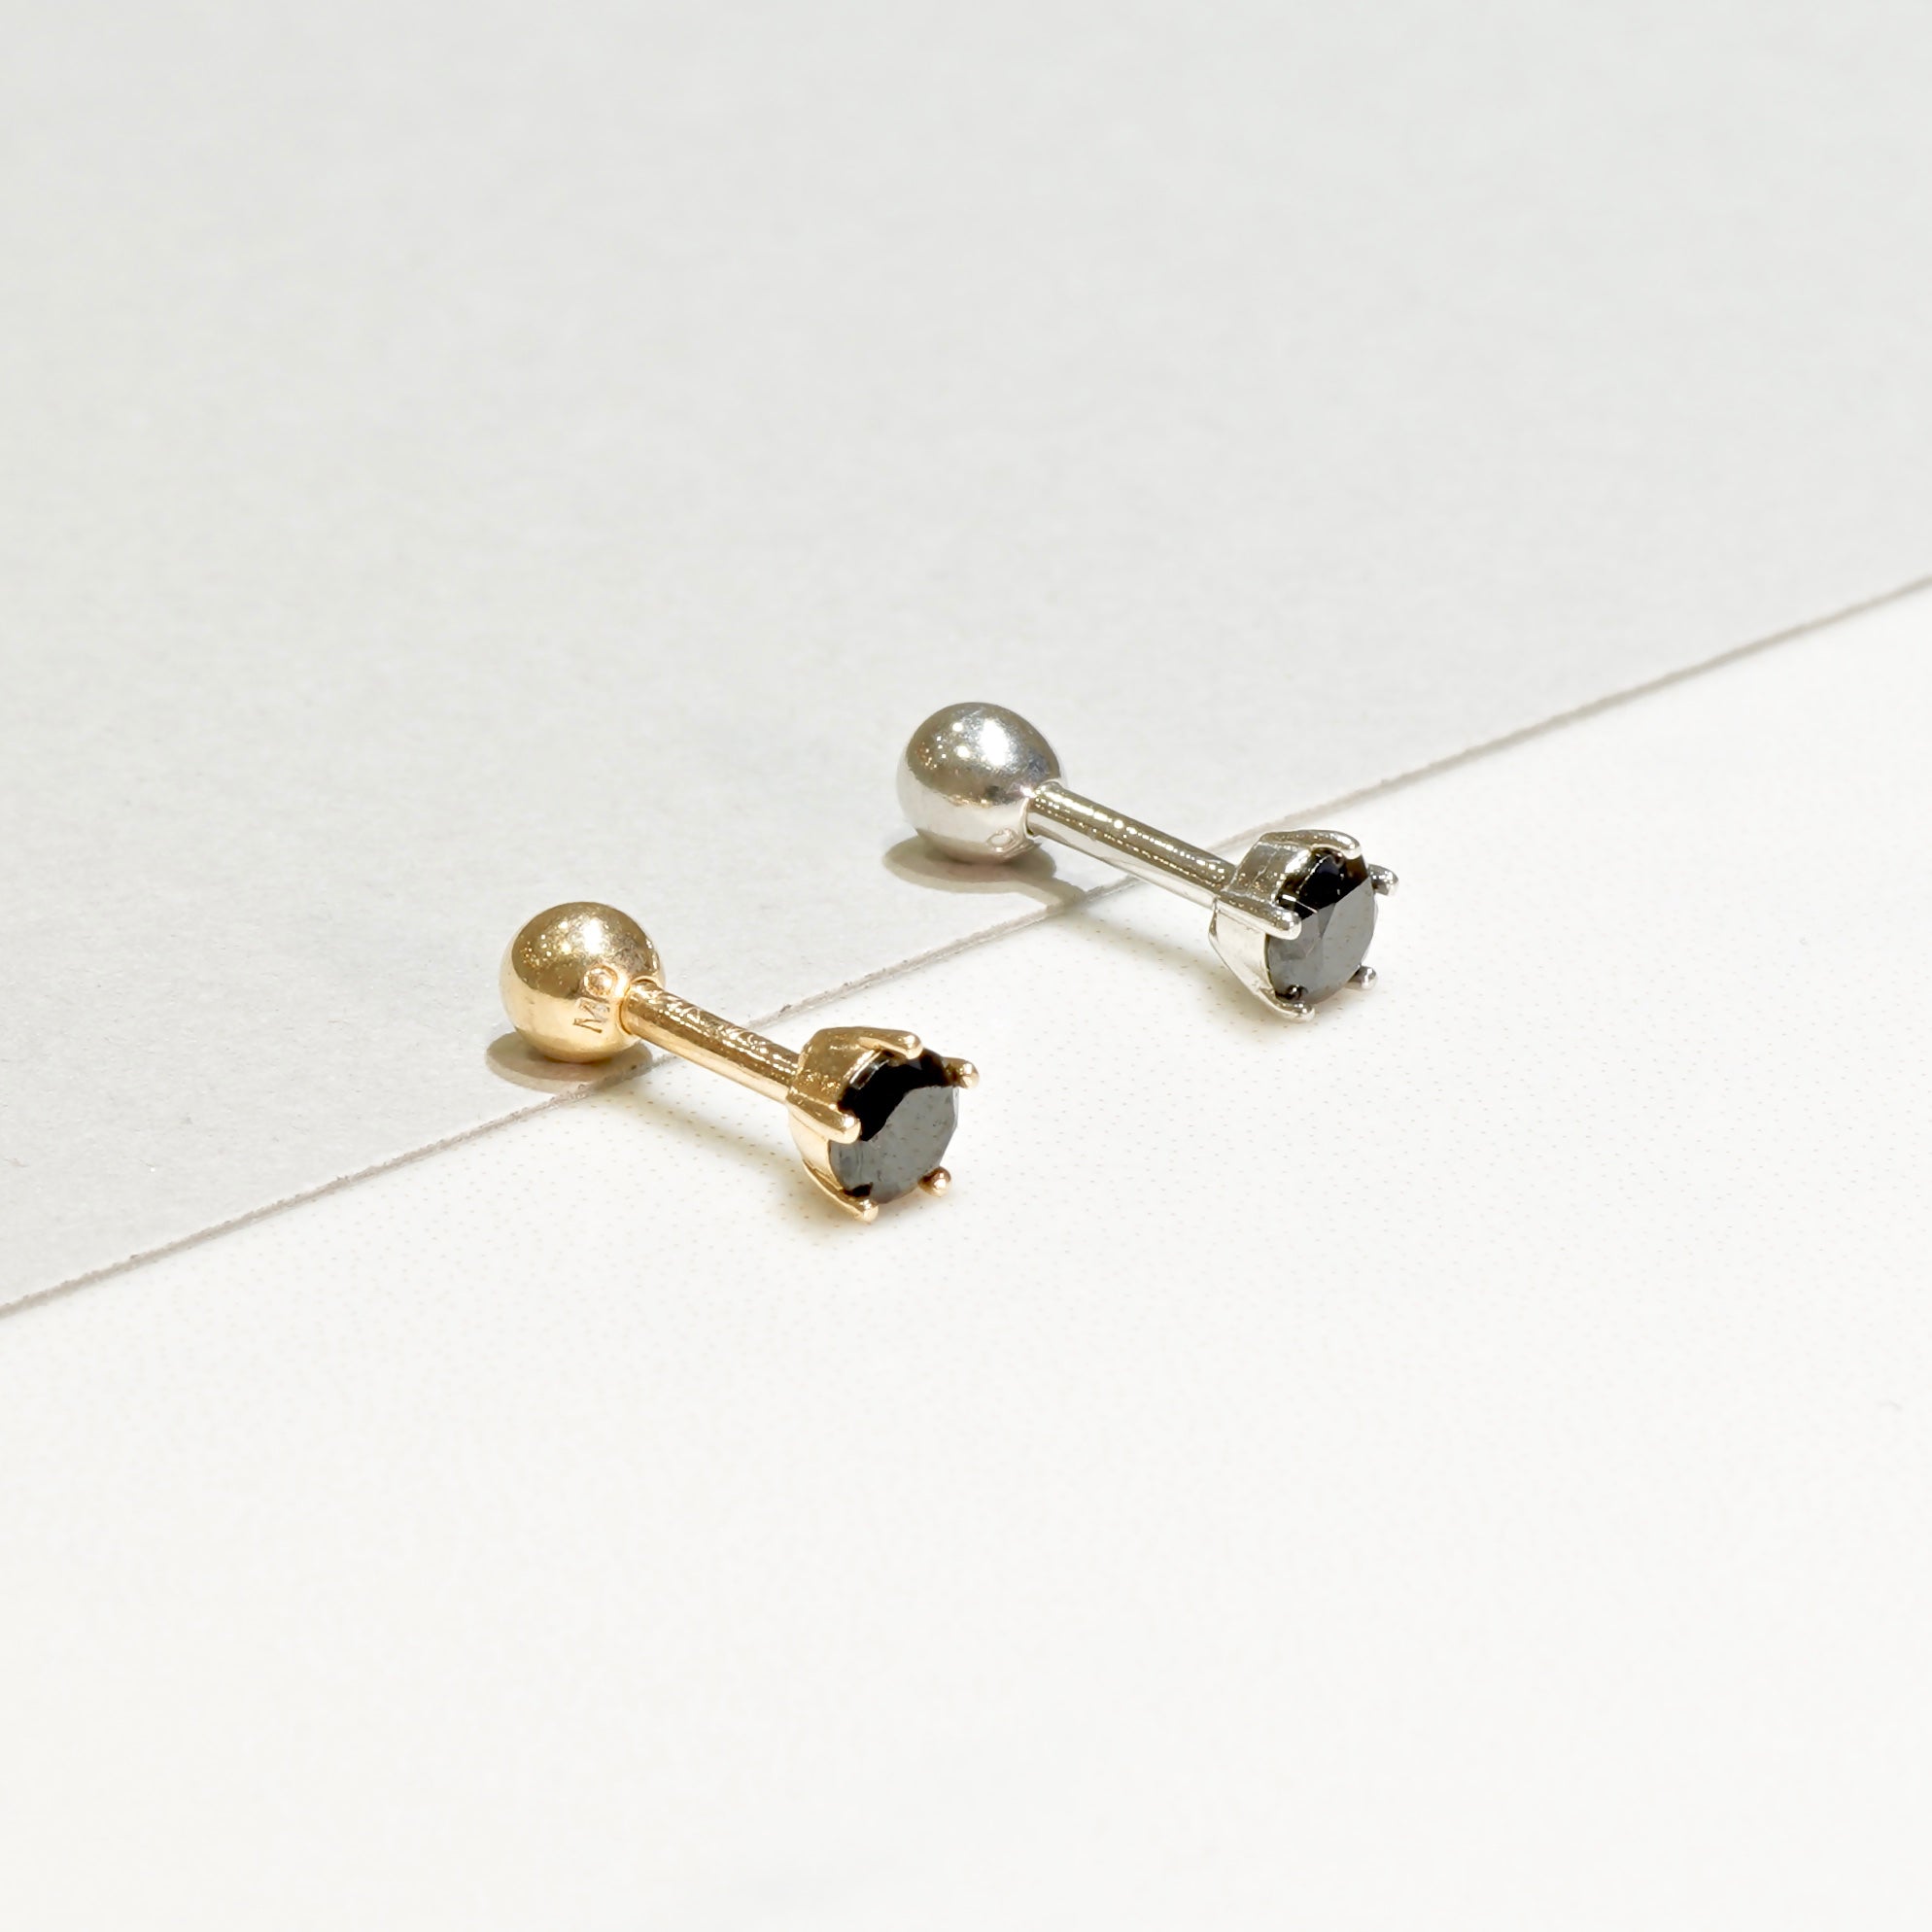 Tragus Piercing Jewelry, 14ct Solid Gold